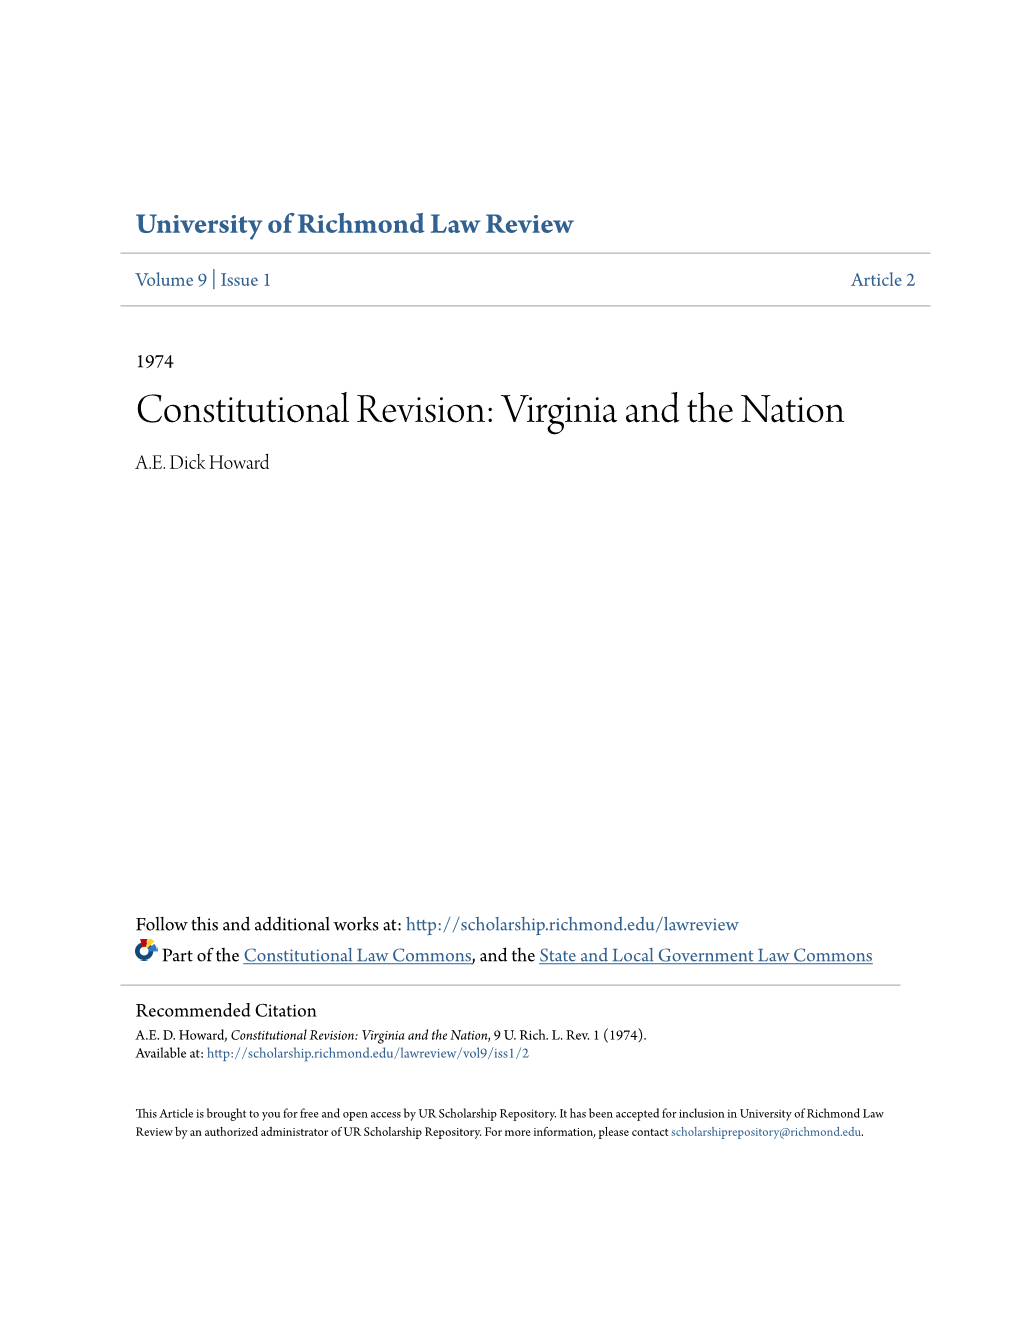 Constitutional Revision: Virginia and the Nation A.E